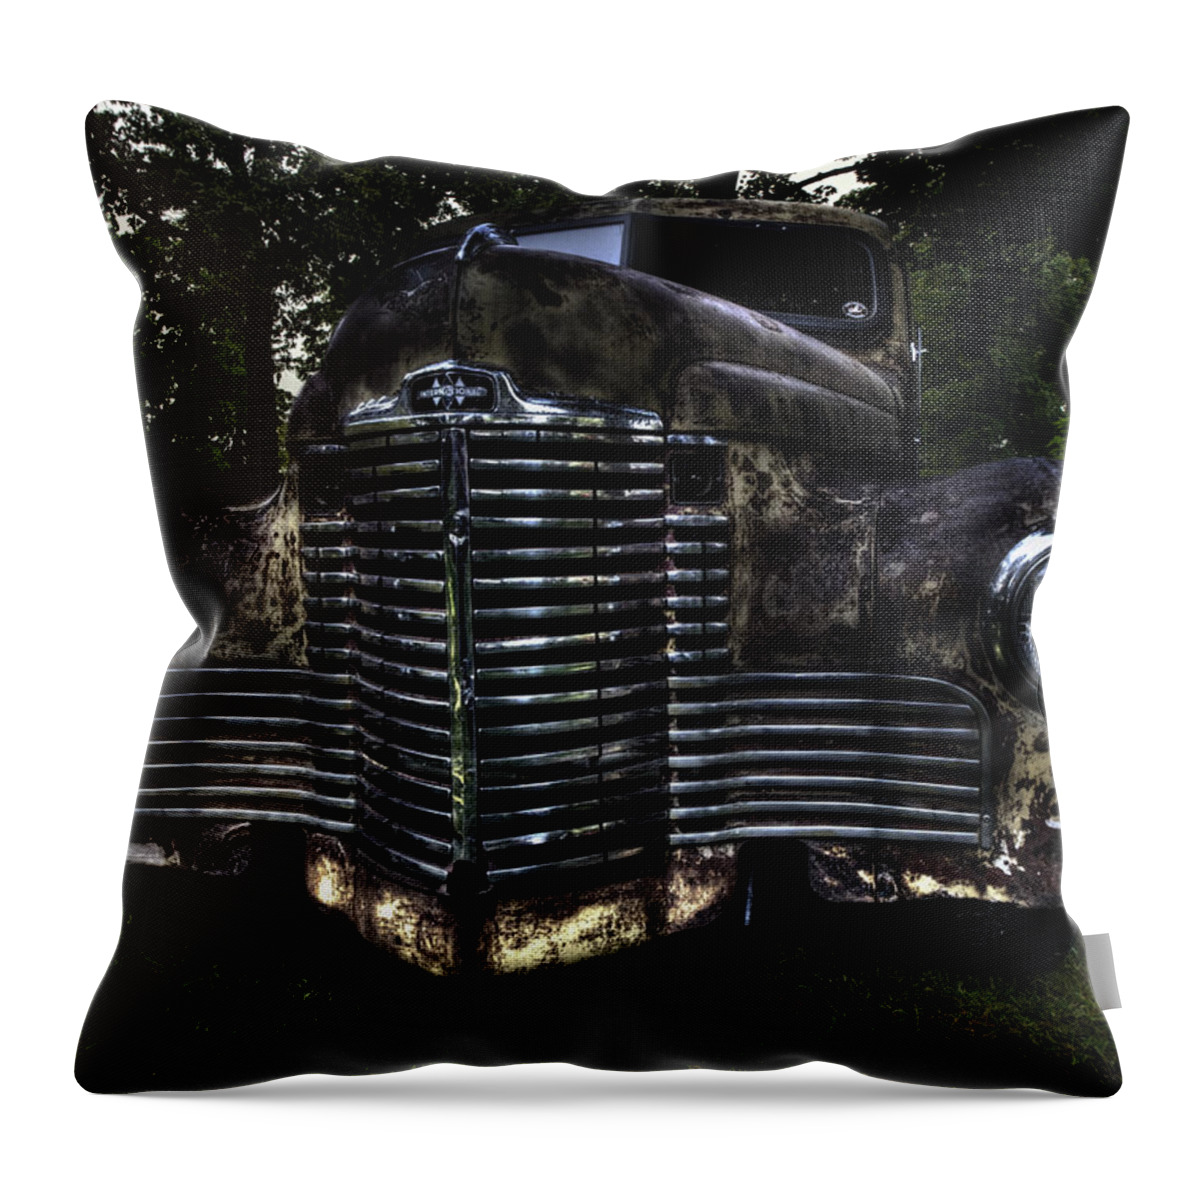 1948 International Truck Throw Pillow featuring the photograph 1948 International Truck by Thomas Young